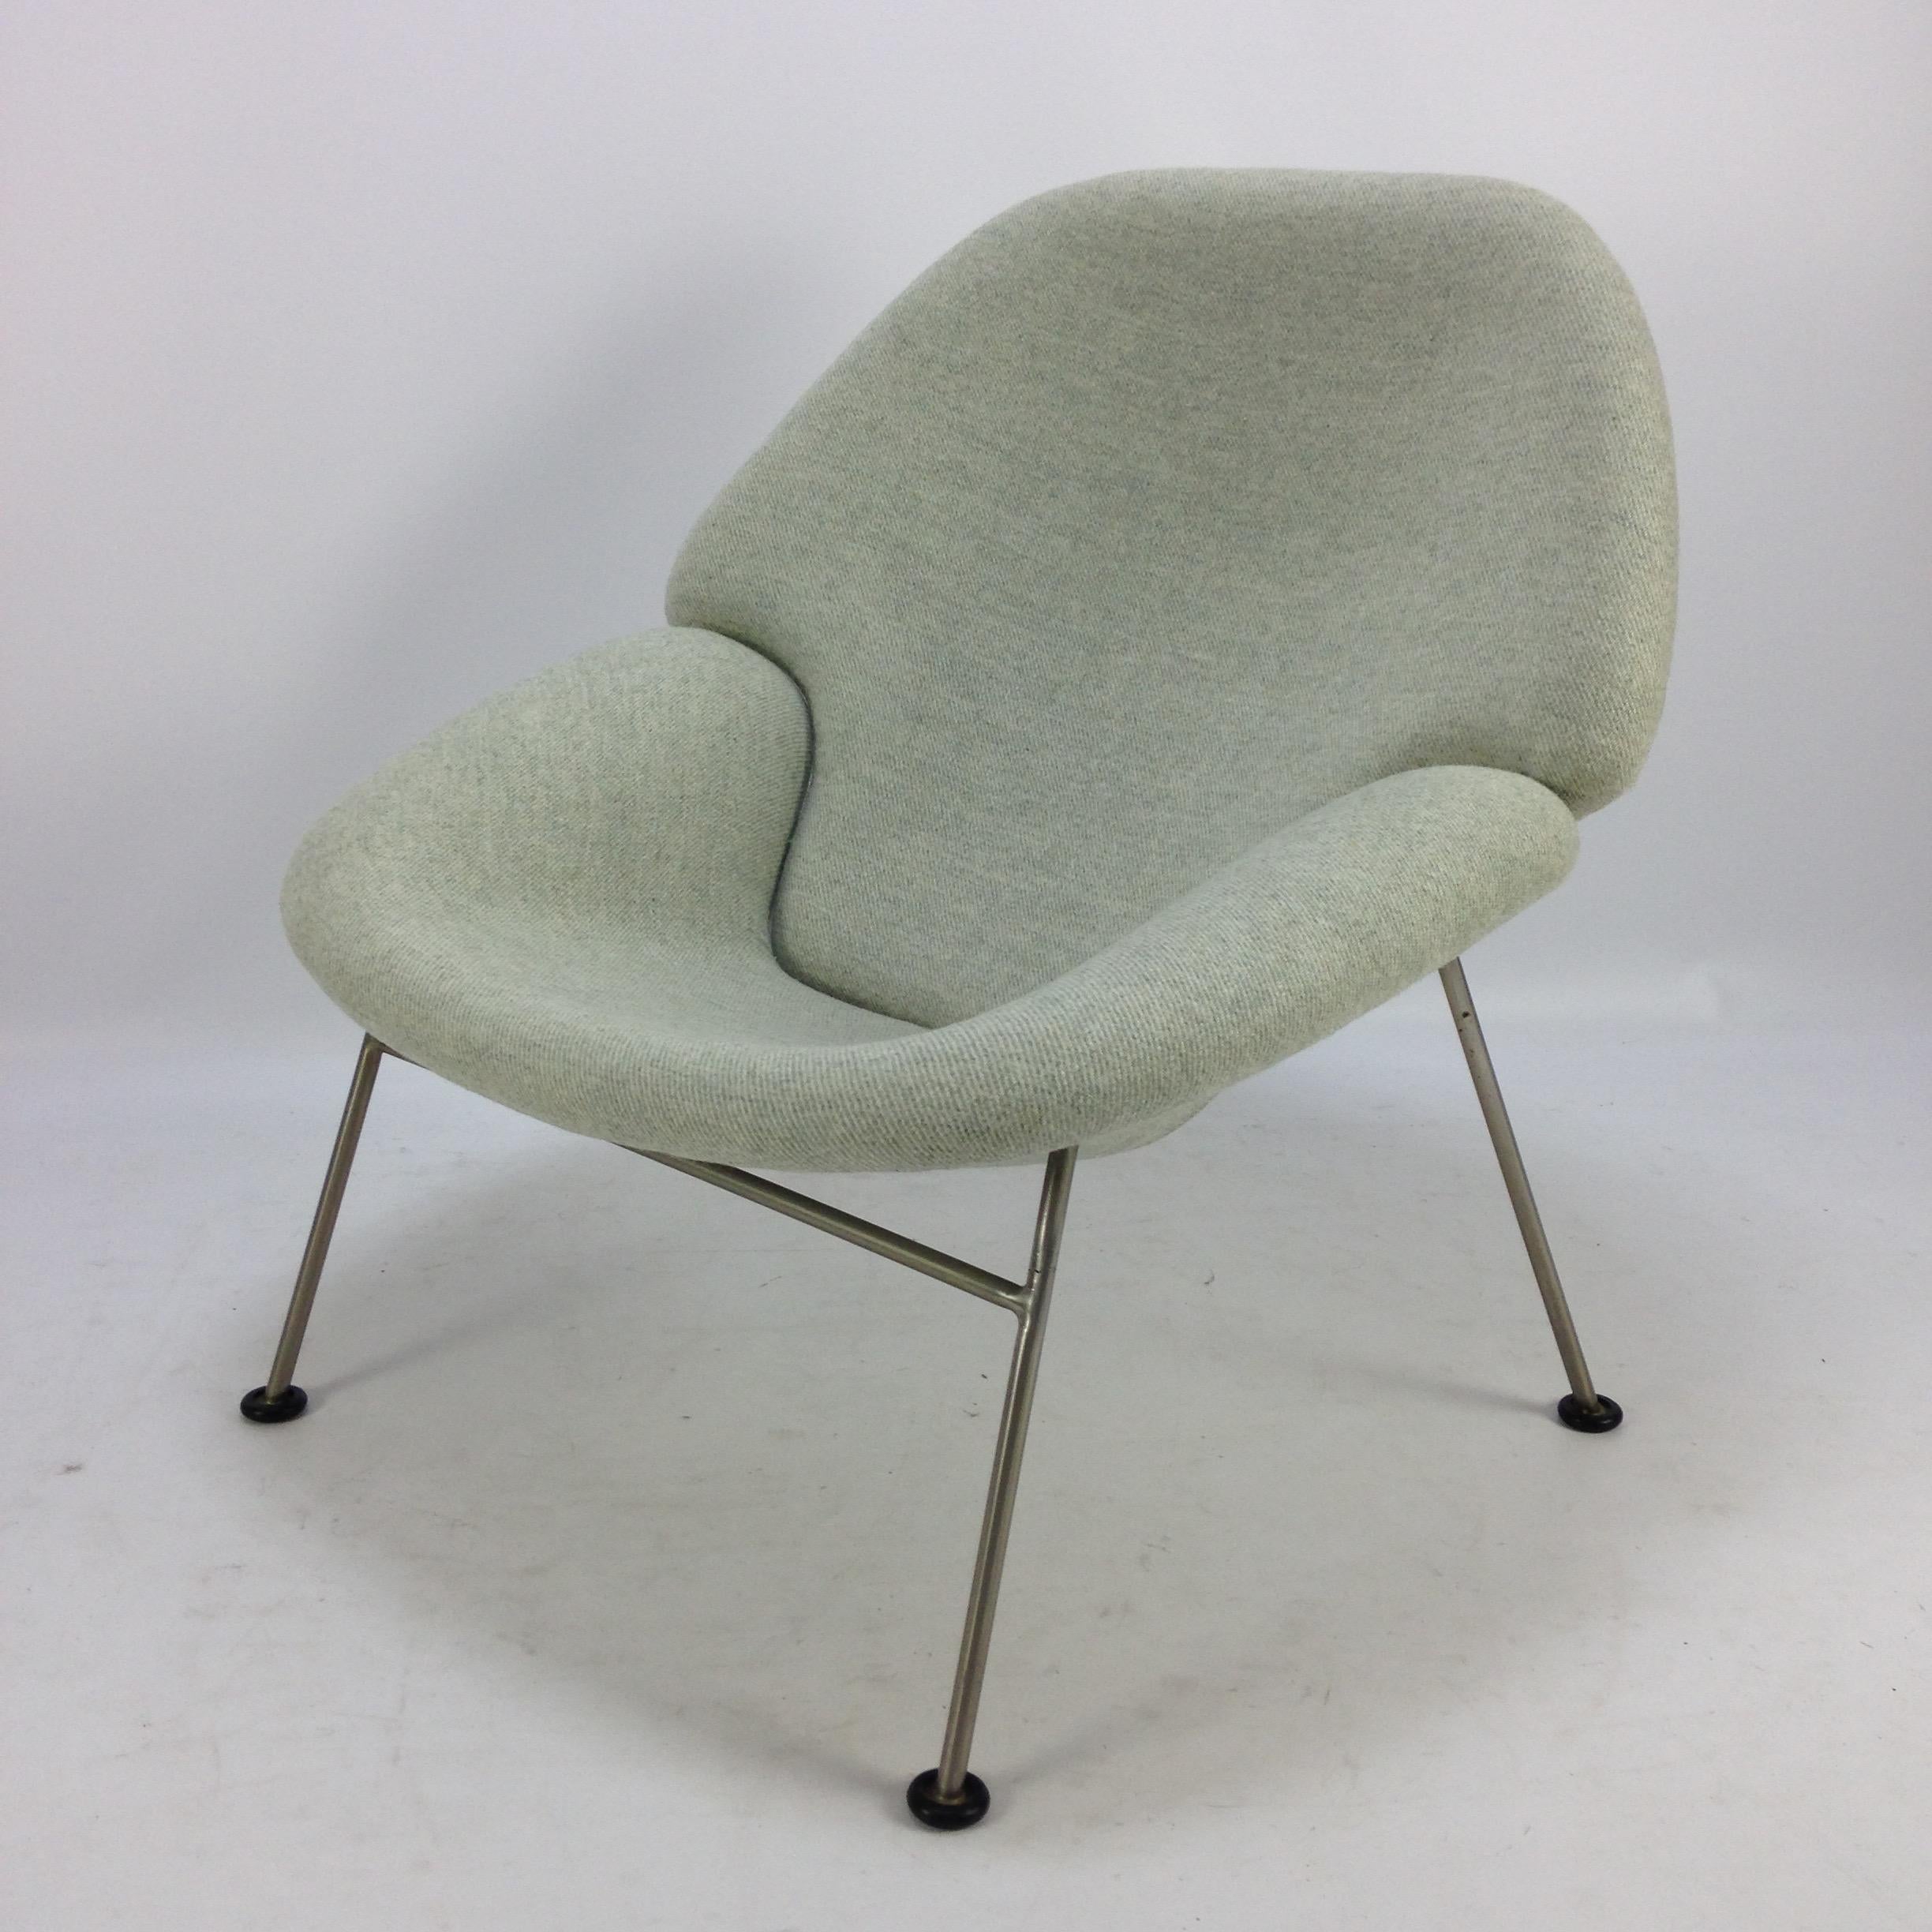 Very rare F555 model, designed by Pierre Paulin for Artifort in the 60's.
Just upholstered with new foam and lovely high quality 100% wool fabric. The chair is in perfect condition. Very comfortable chair!
  